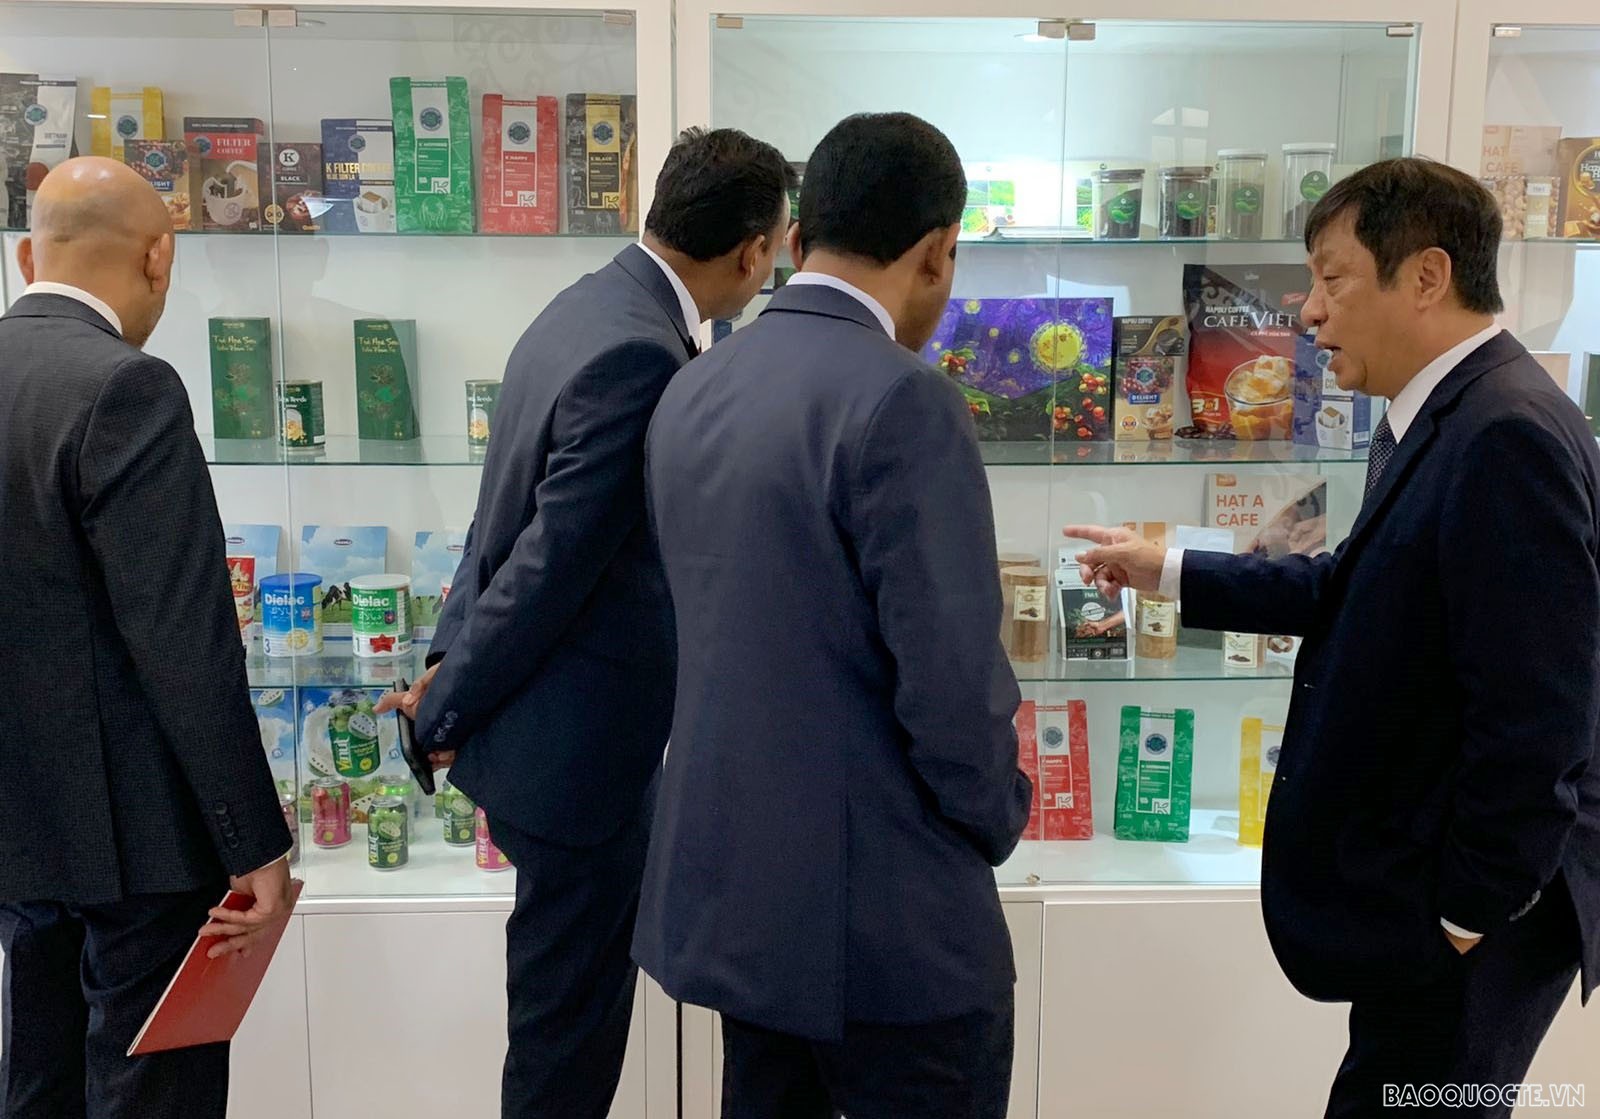 Ambassador Nguyen Manh Tuan introduced the products to the delegates